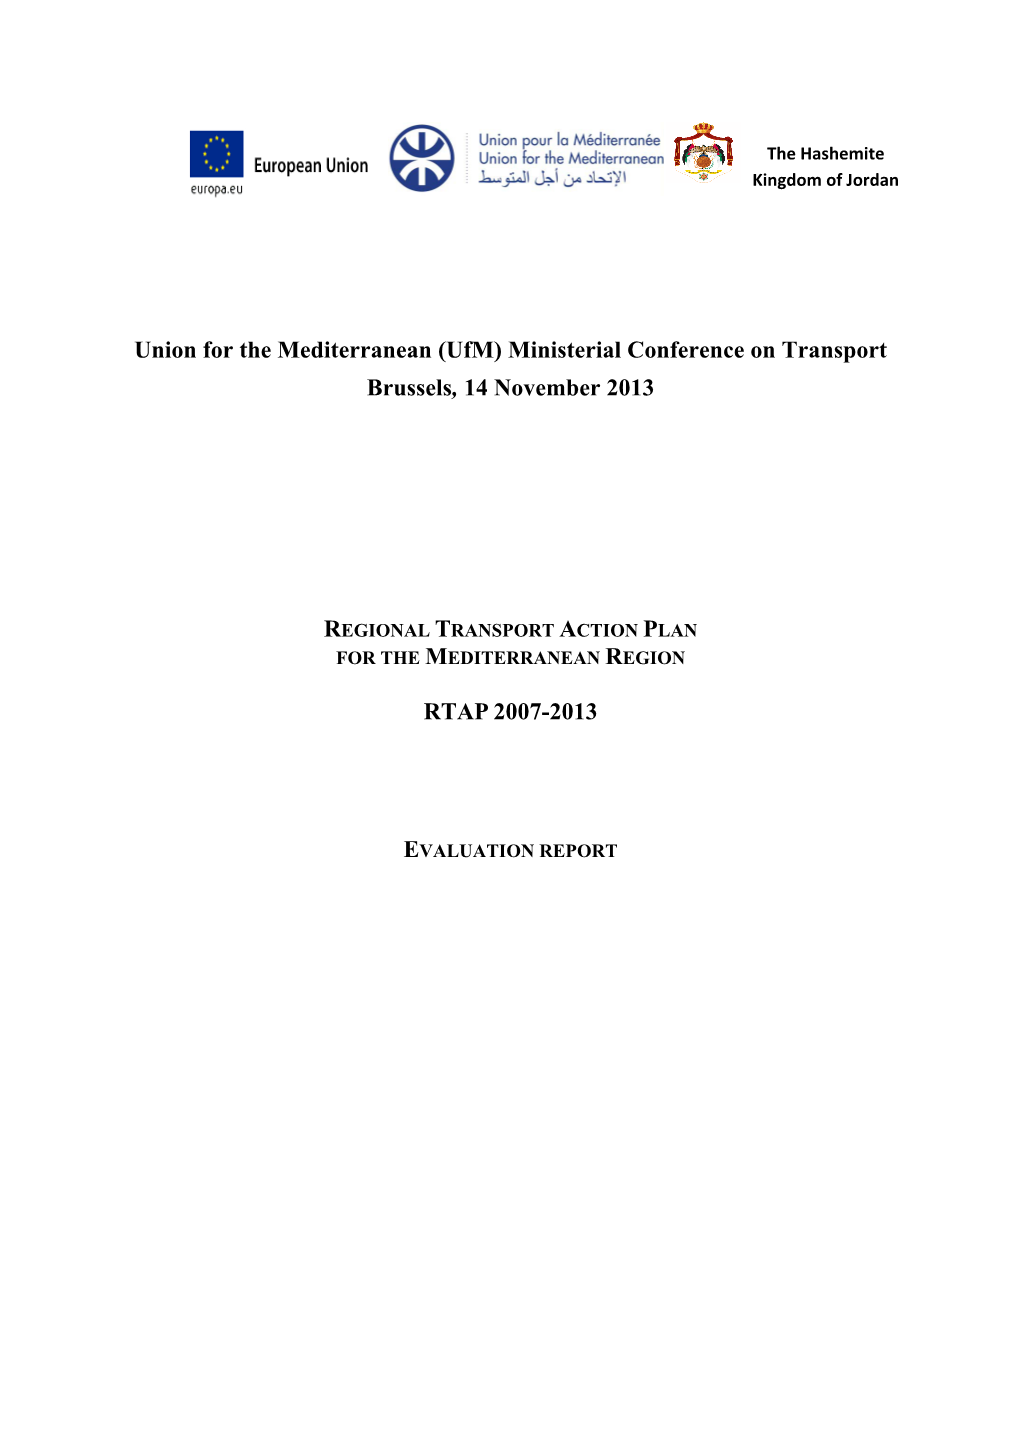 Evaluation Report of the Regional Transport